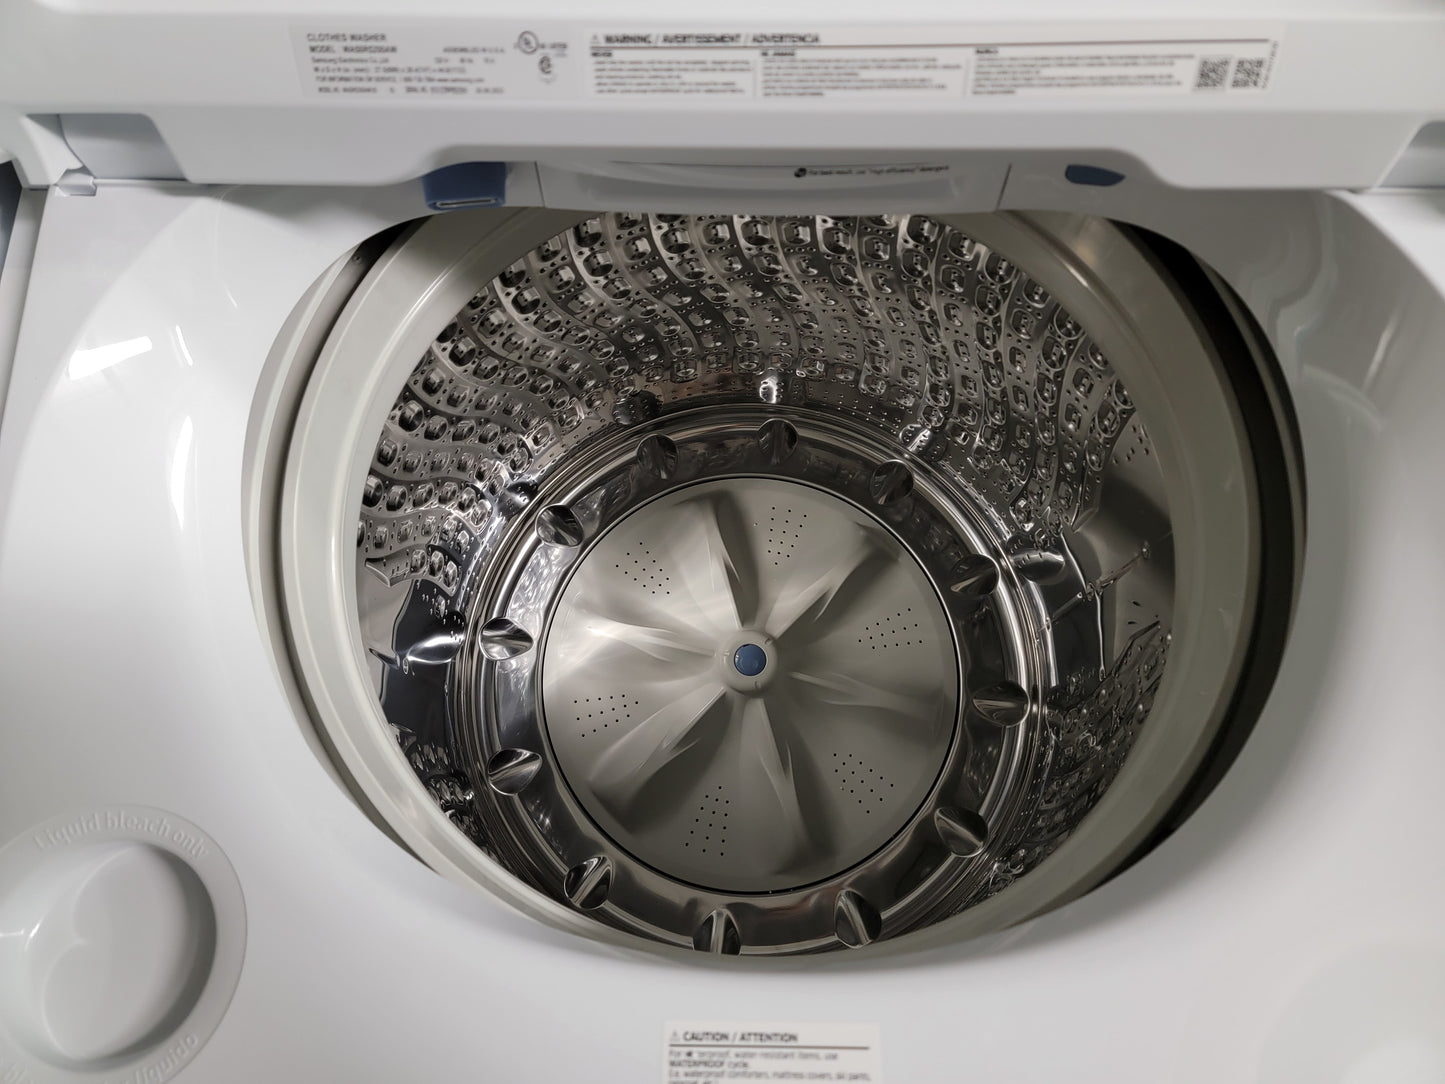 Samsung 5 cu ft High Efficiency Top-Load Washer & 7.4 cu ft Steam Cycle Smart Electric Dryer Set (White) ENERGY STAR - WA50R5200AW/DVE52A5500W